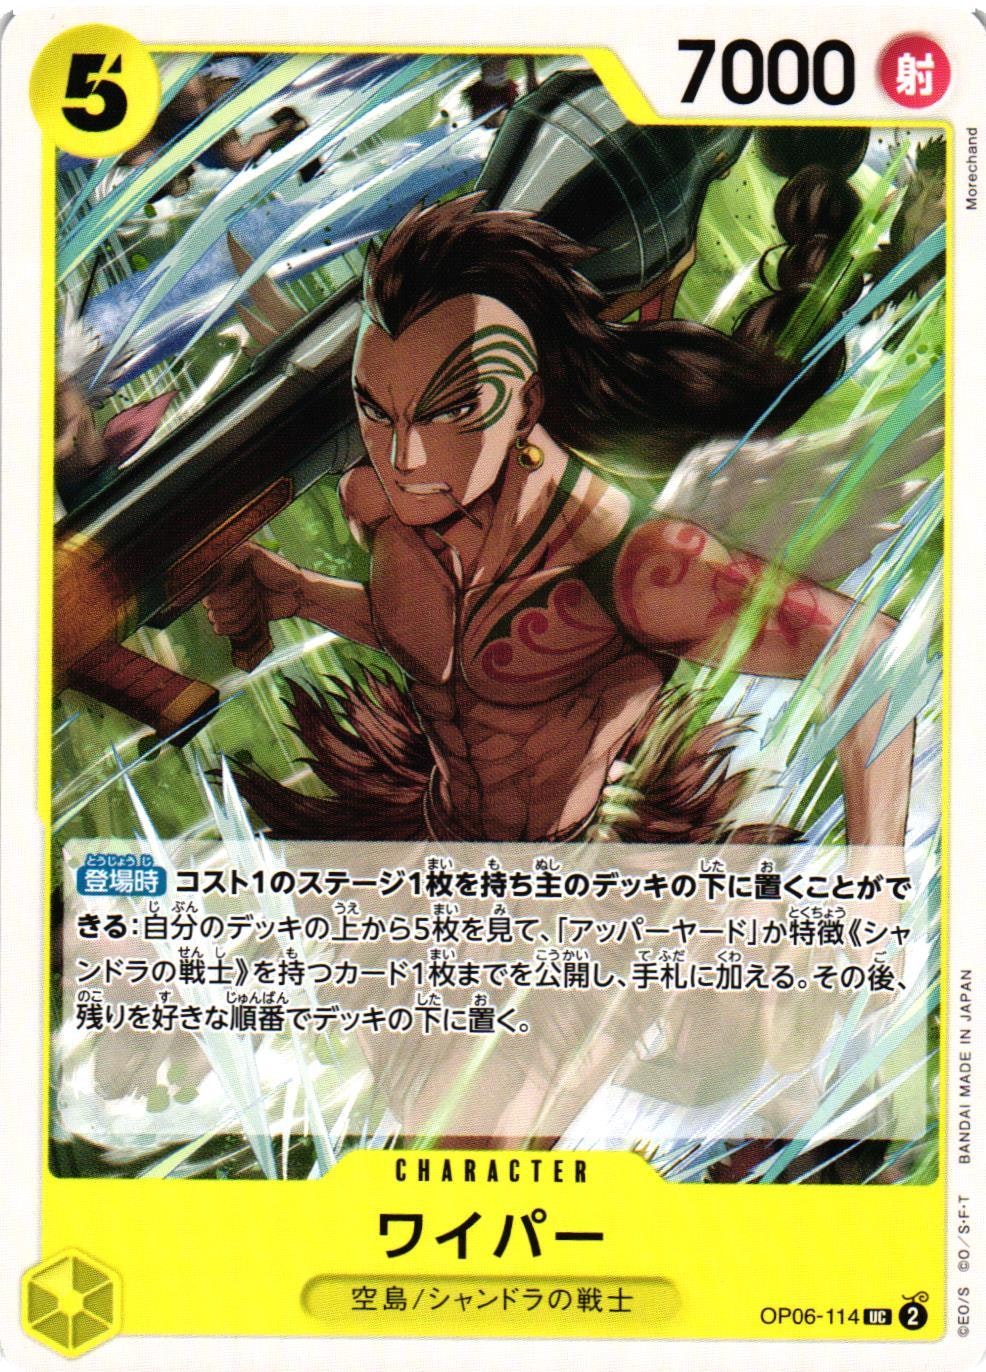 Wyper Uncommon OP06-114 Wings of the Captain One Piece